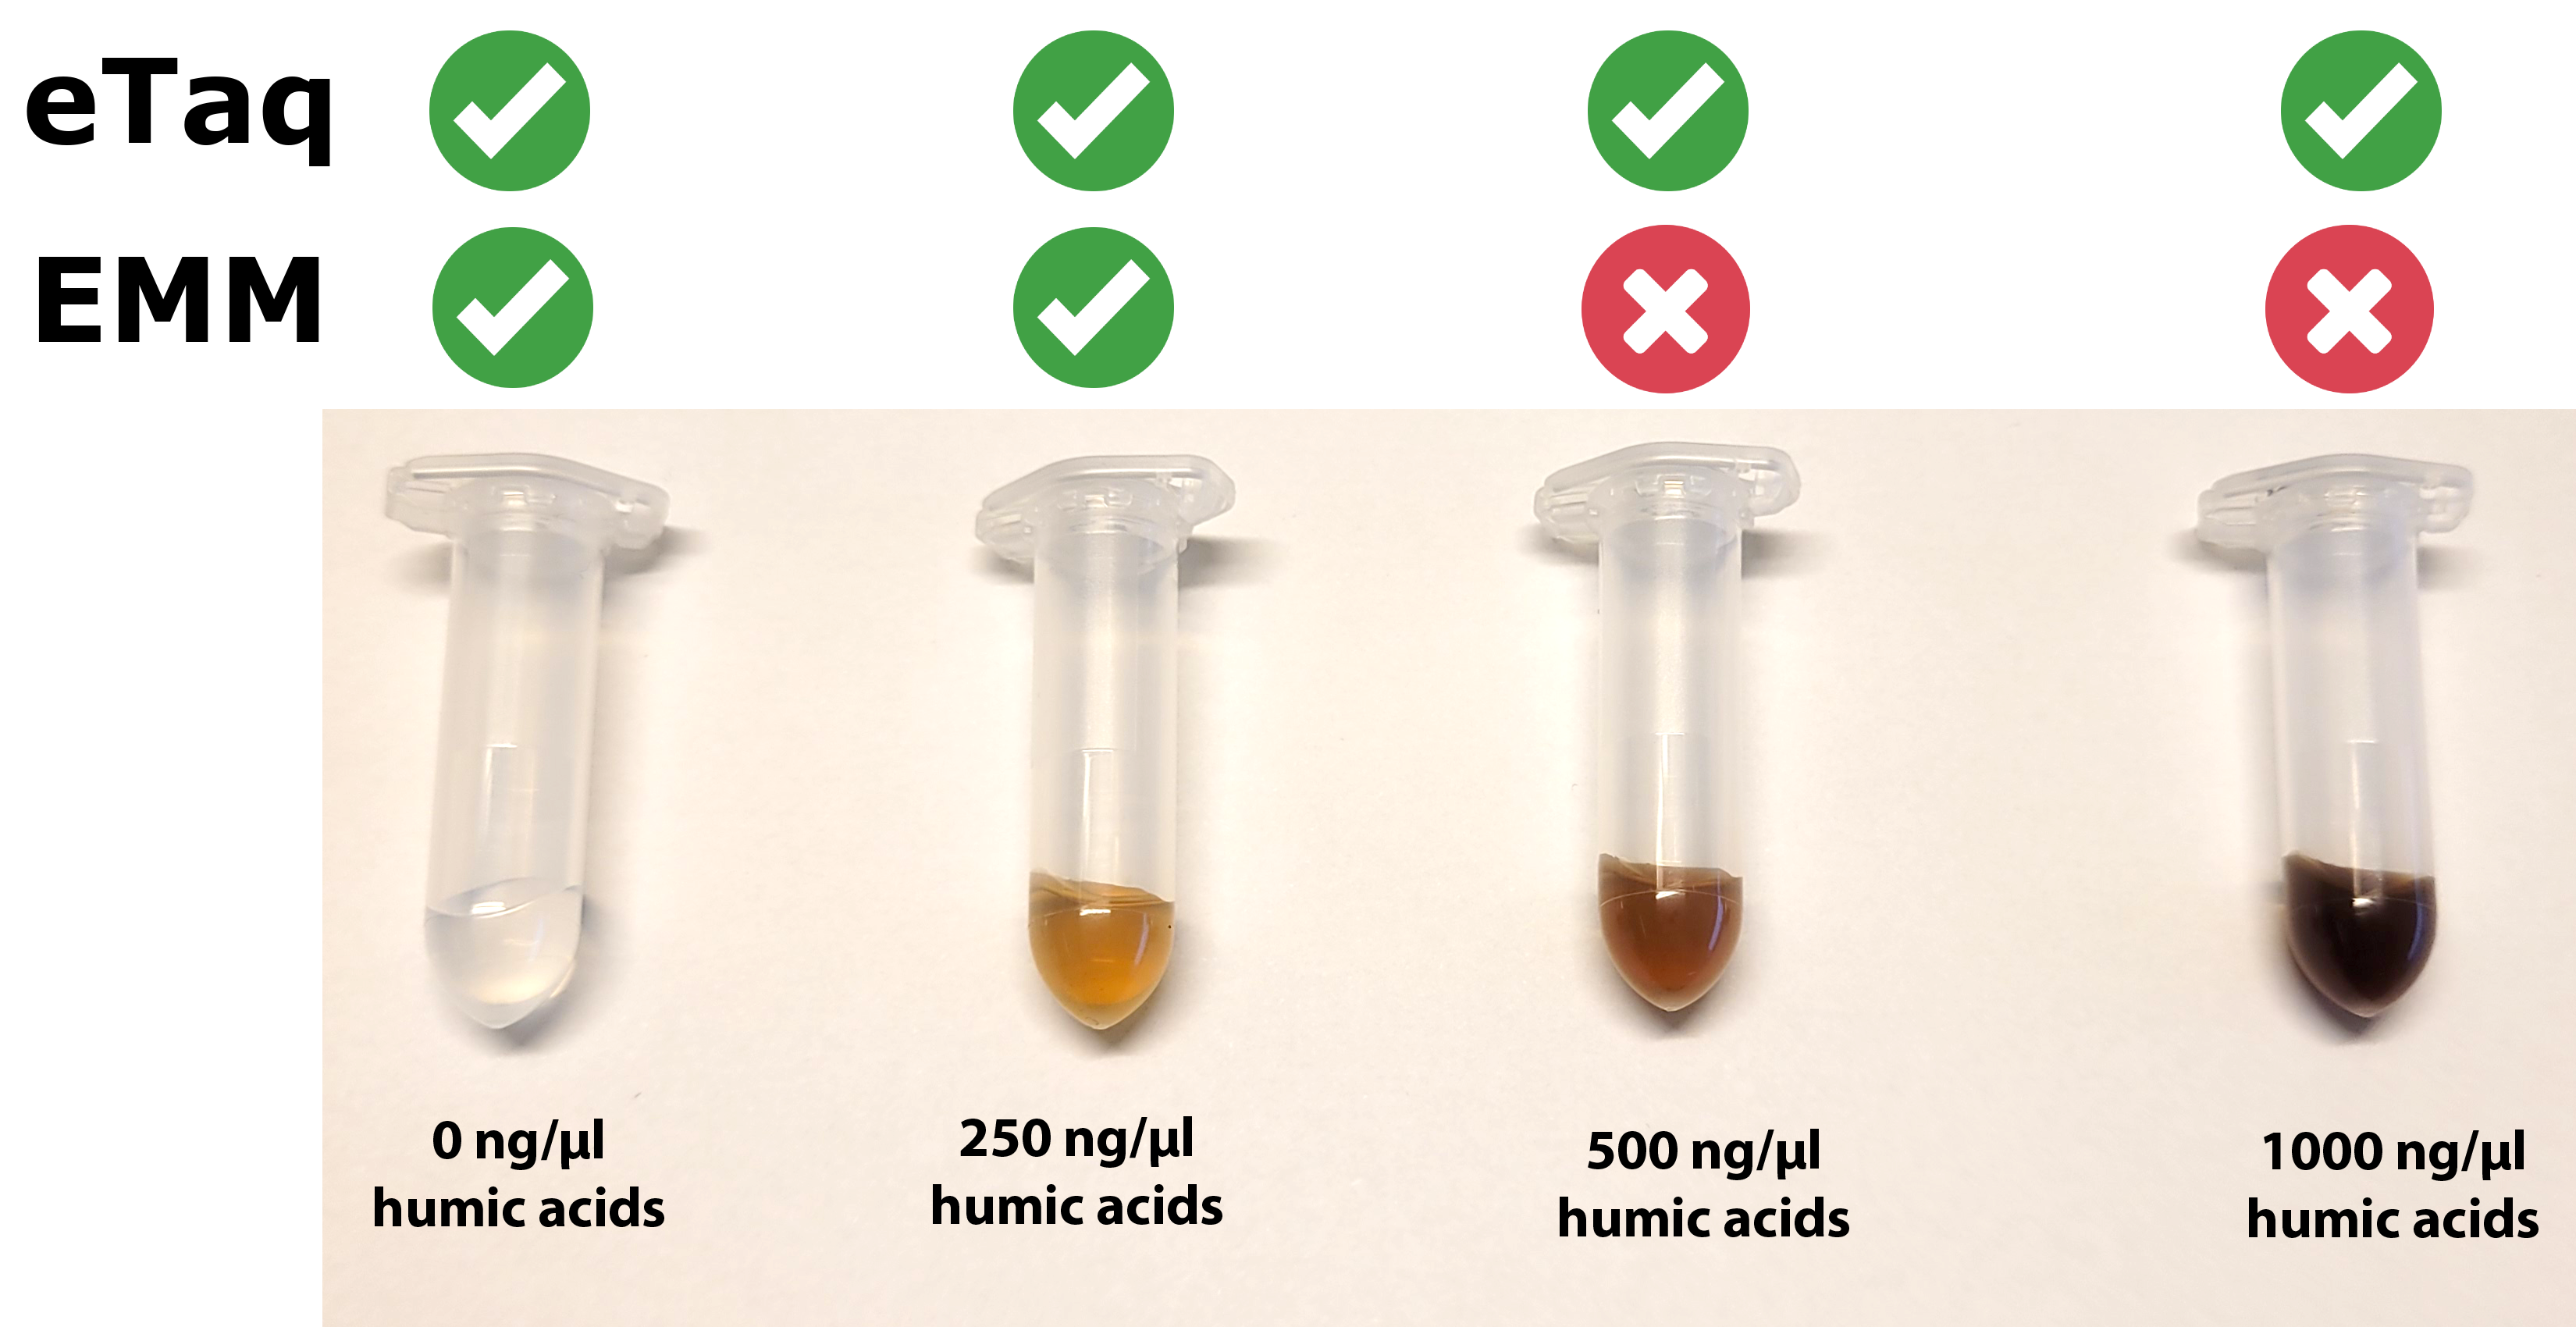 Ability of eTaq qPCR master mix of Sylphium and EMM of company T to detect target DNA at different humic acid concentrations. Experiments performed as described by Uchii et al, 2019*